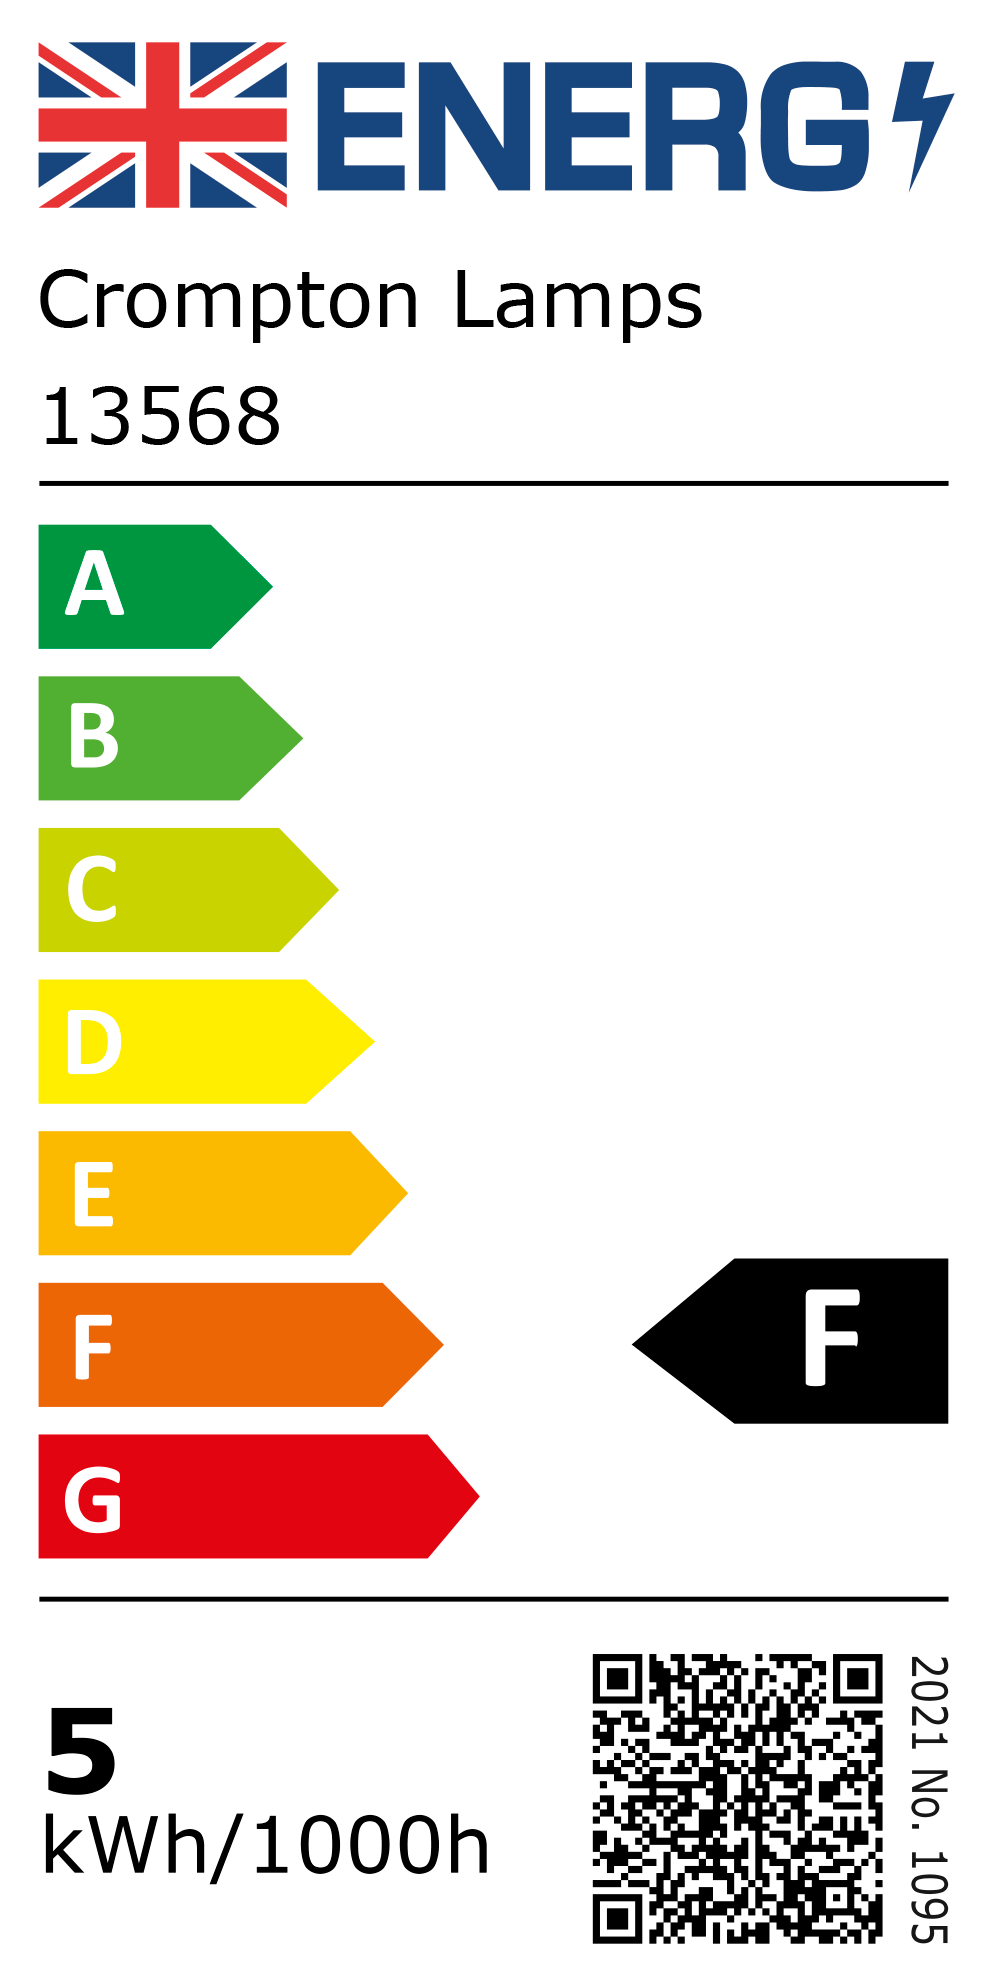 New 2021 Energy Rating Label: Stock Code 13568